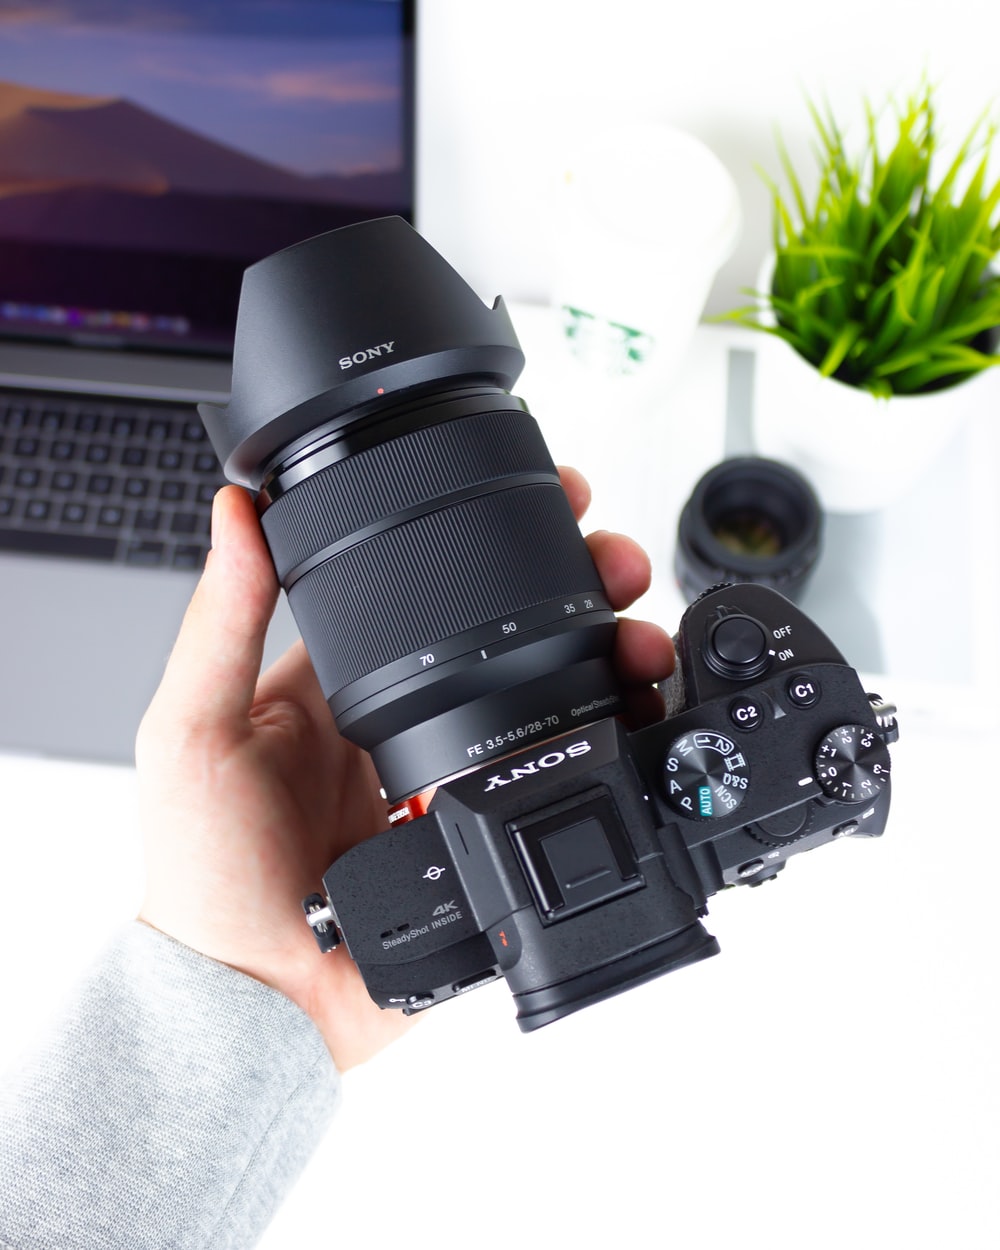 Sony A7Iii Photography Picture. Download Free Image